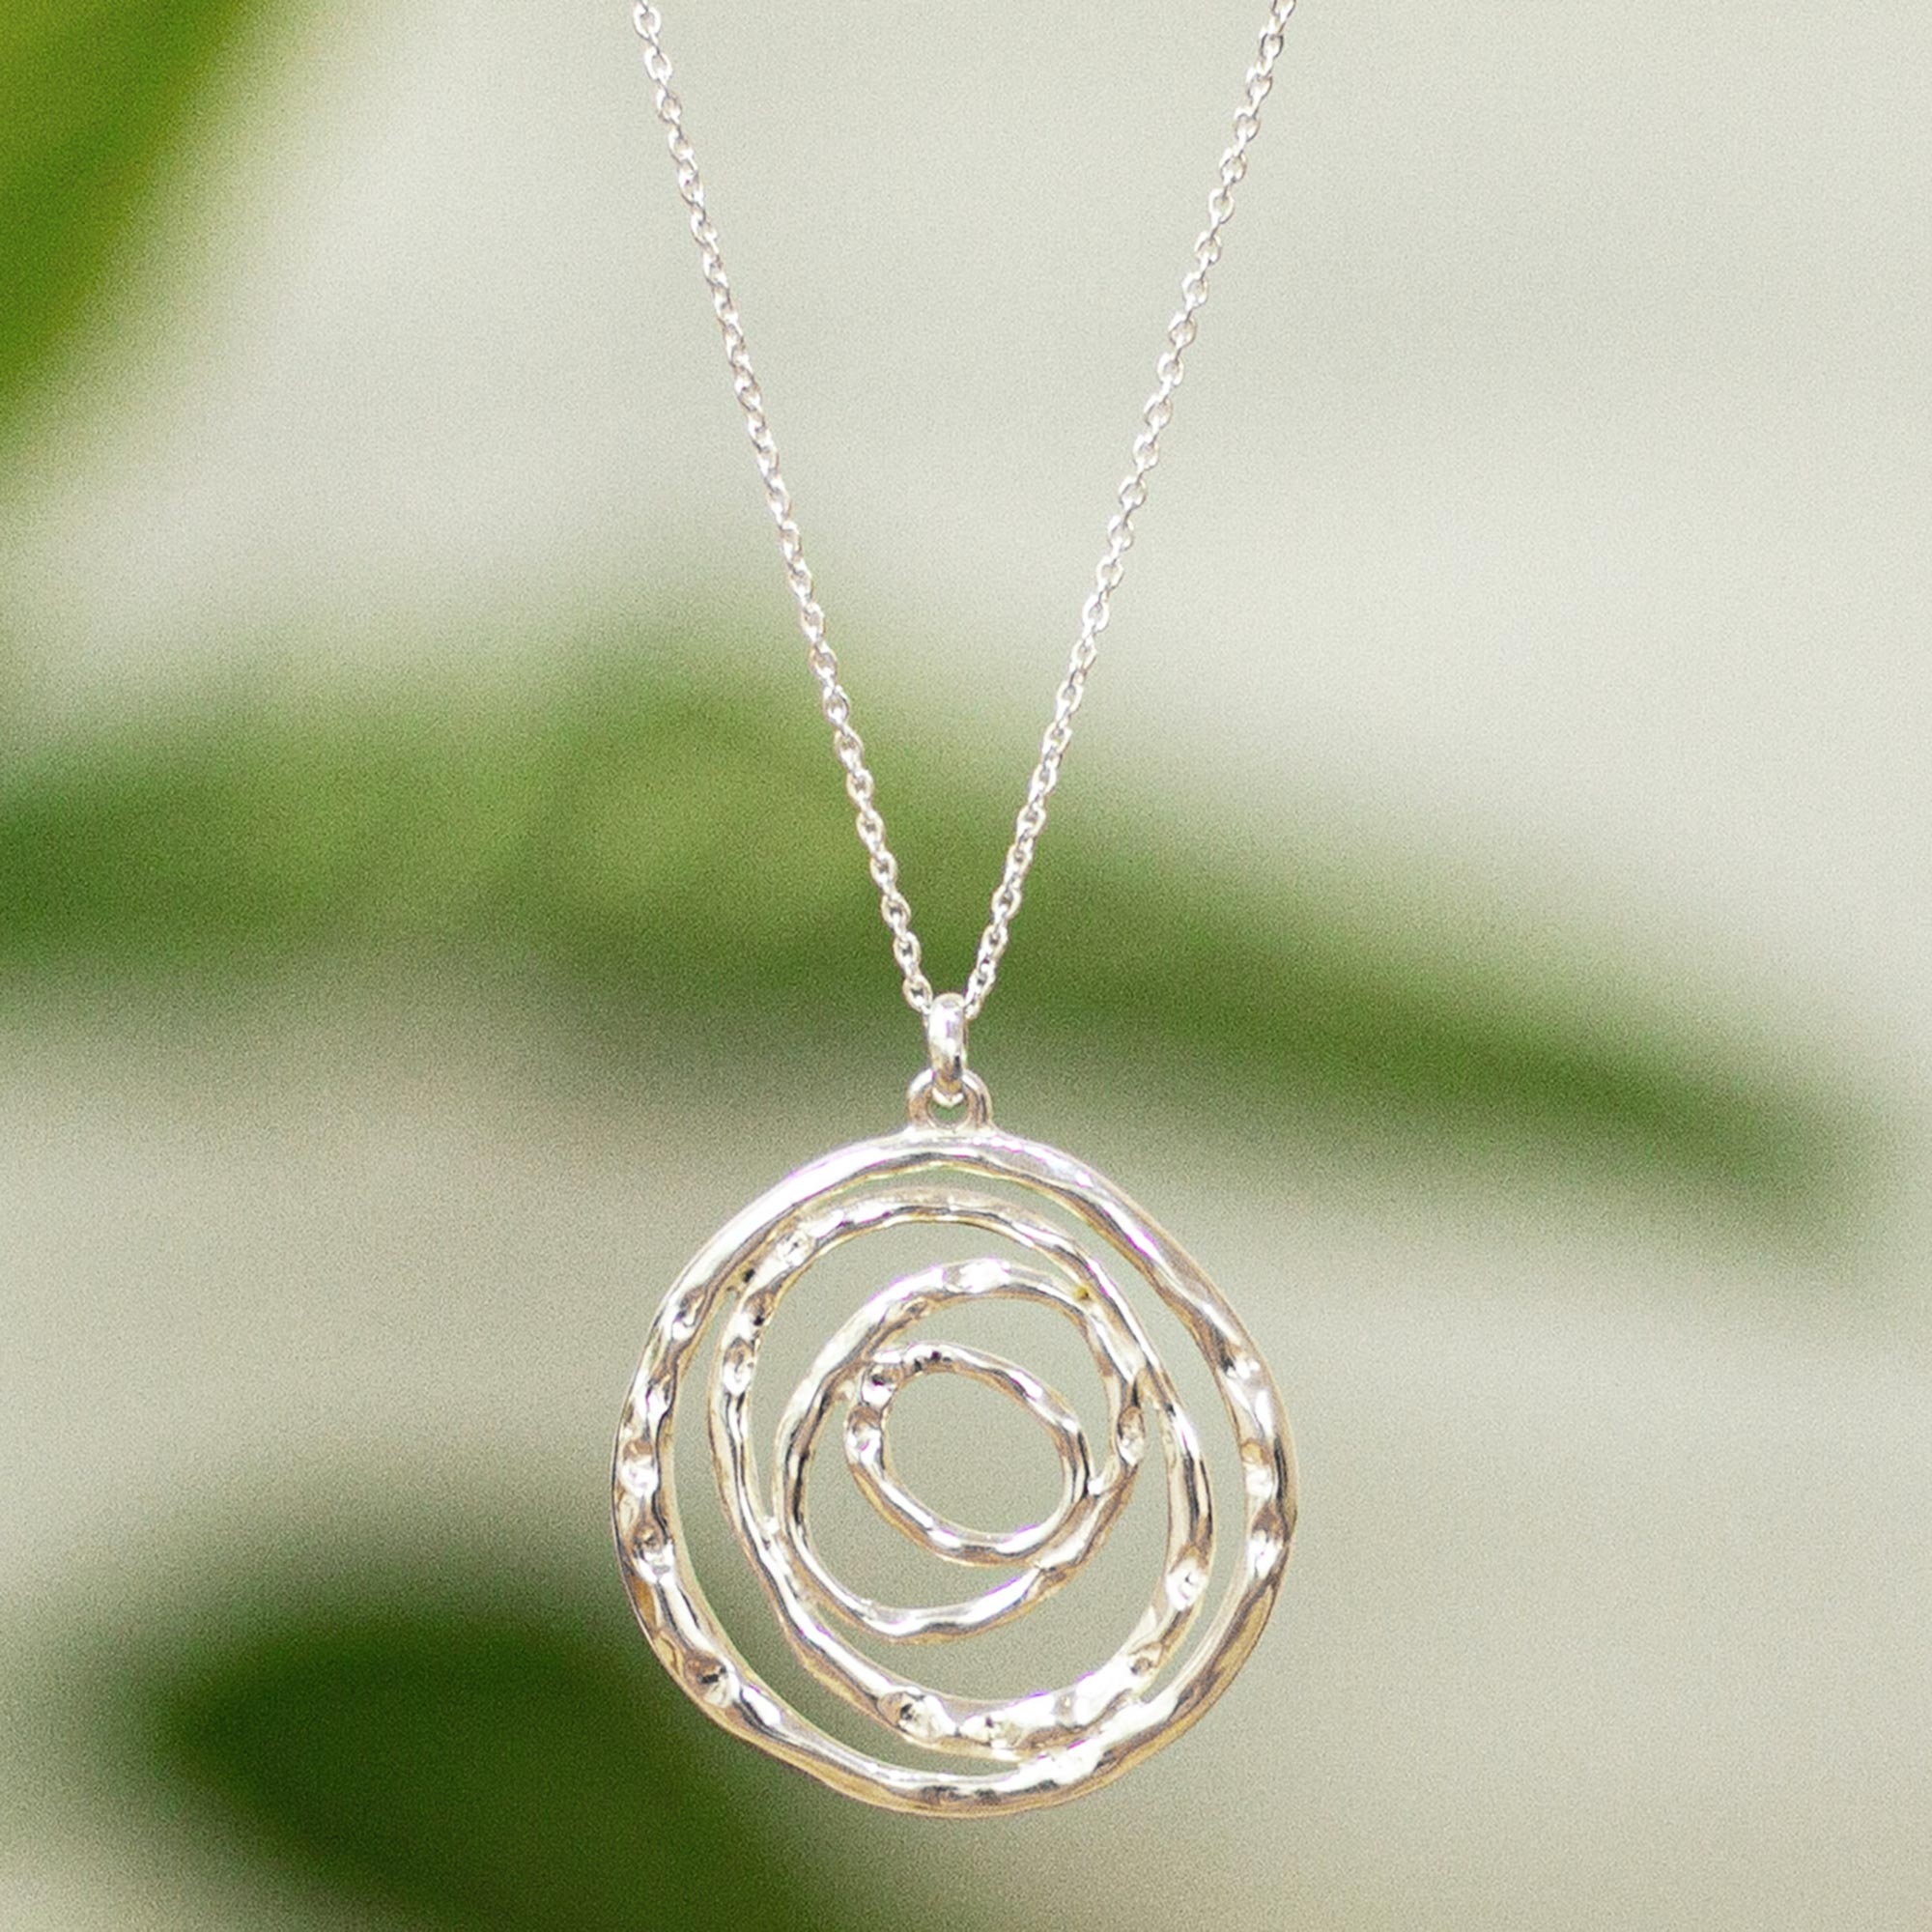 Taxco Silver Abstract Spiral Pendant Necklace from Mexico - Silver Swirl